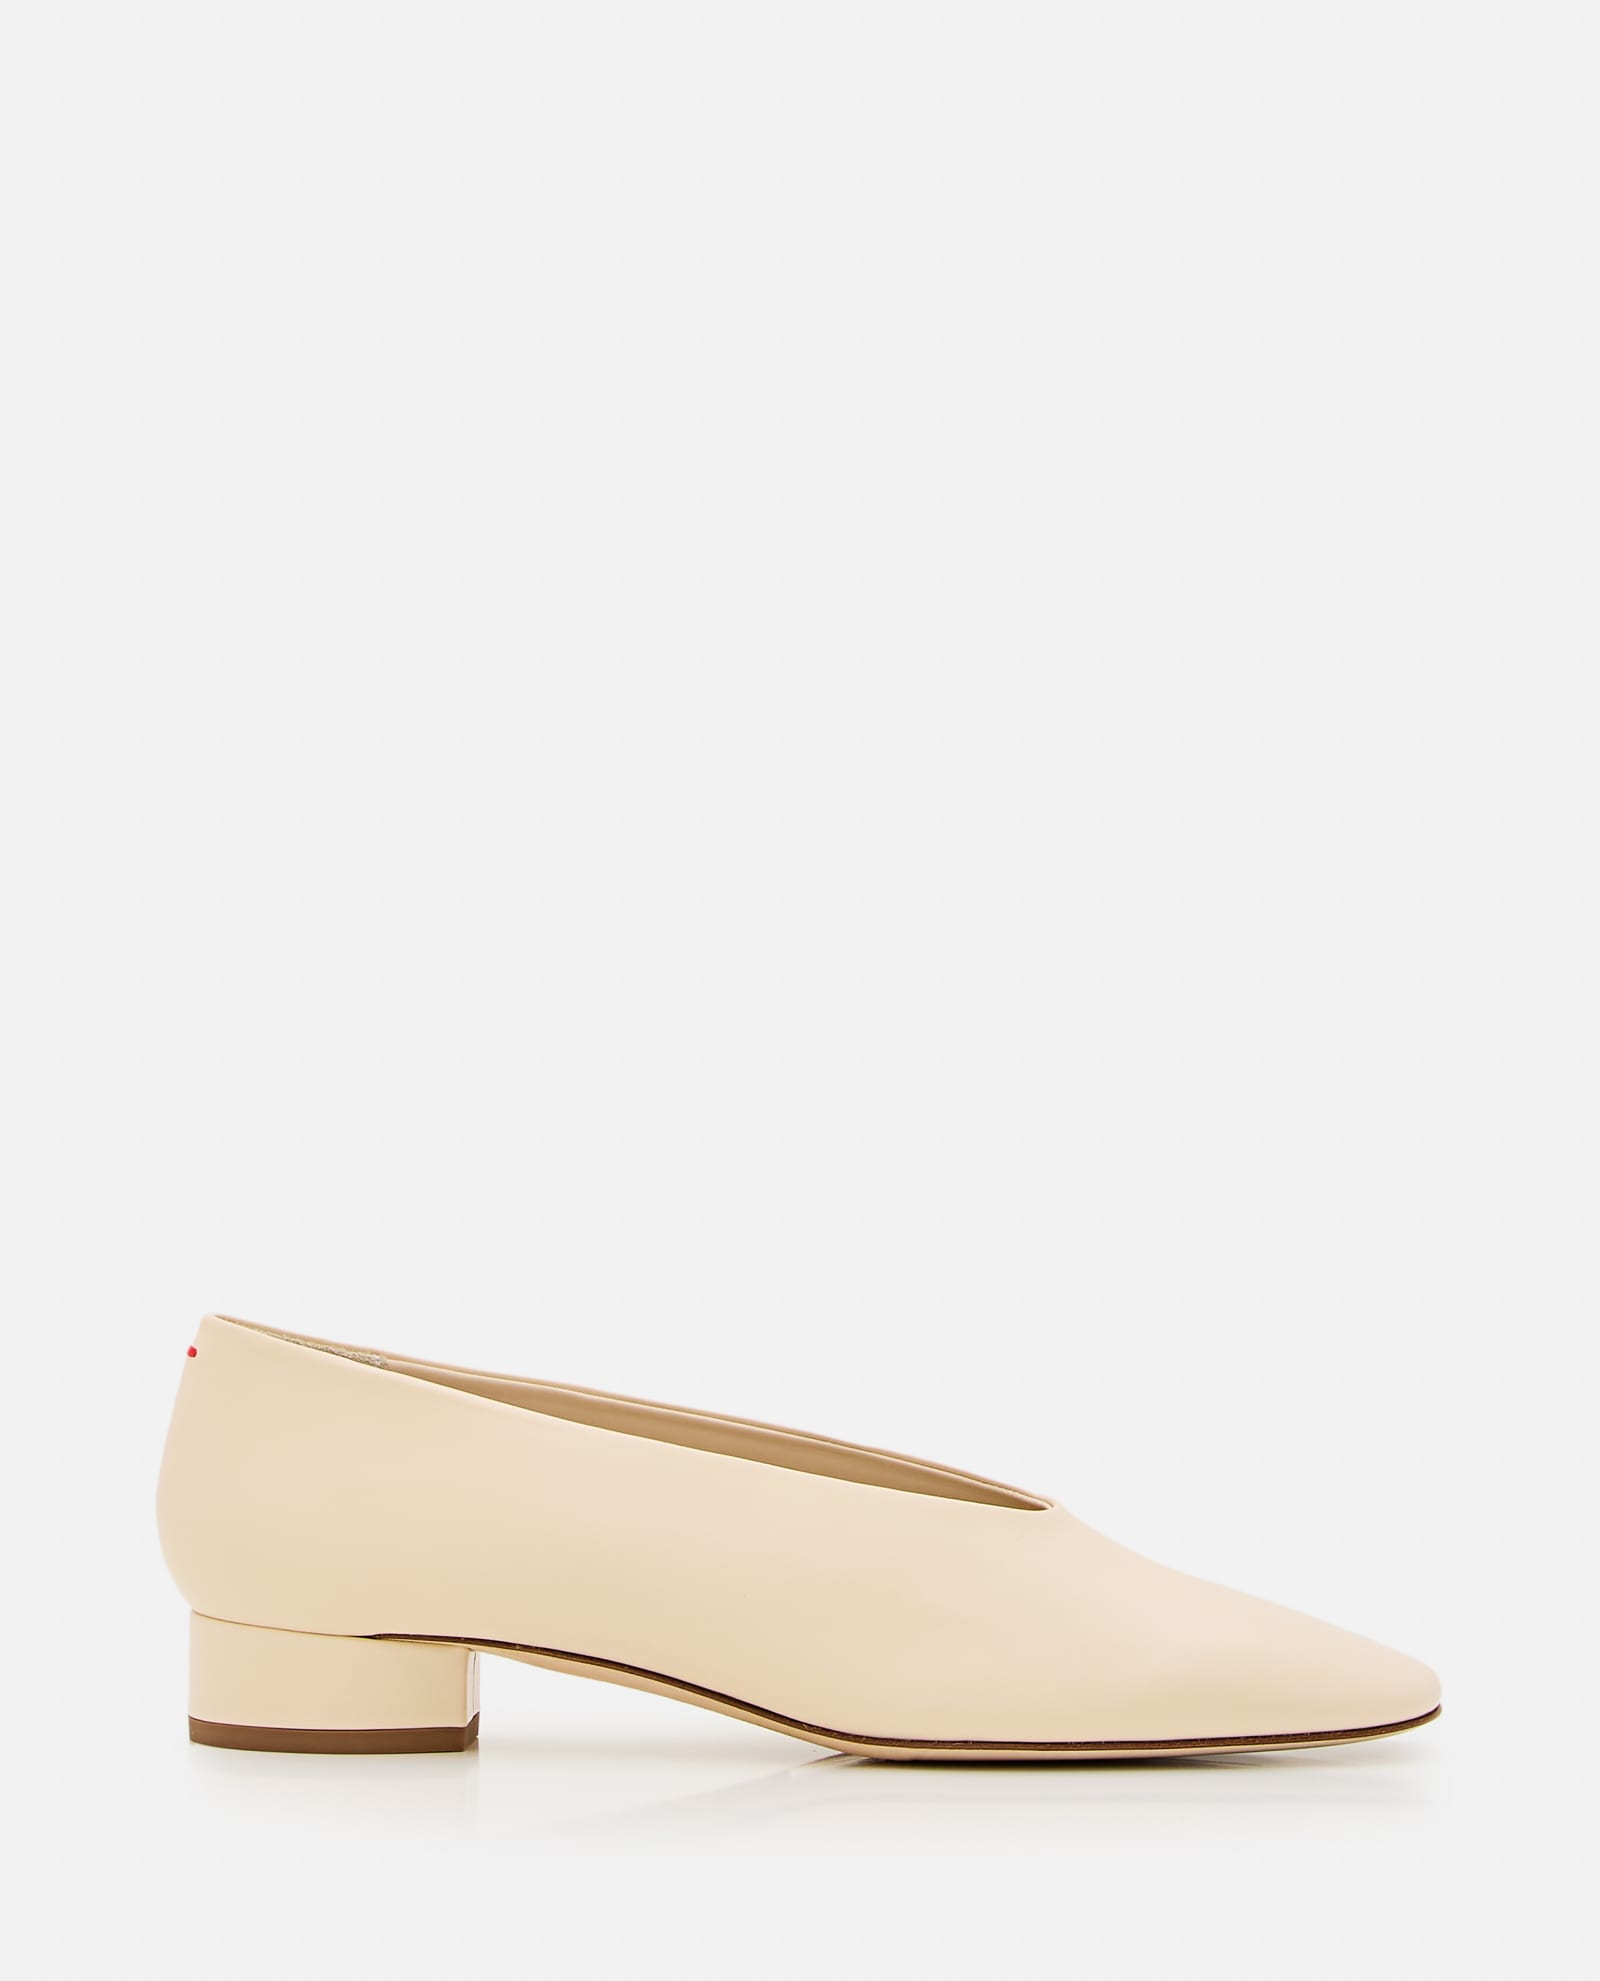 Aeyde Delia Nappa Leather Pump In White